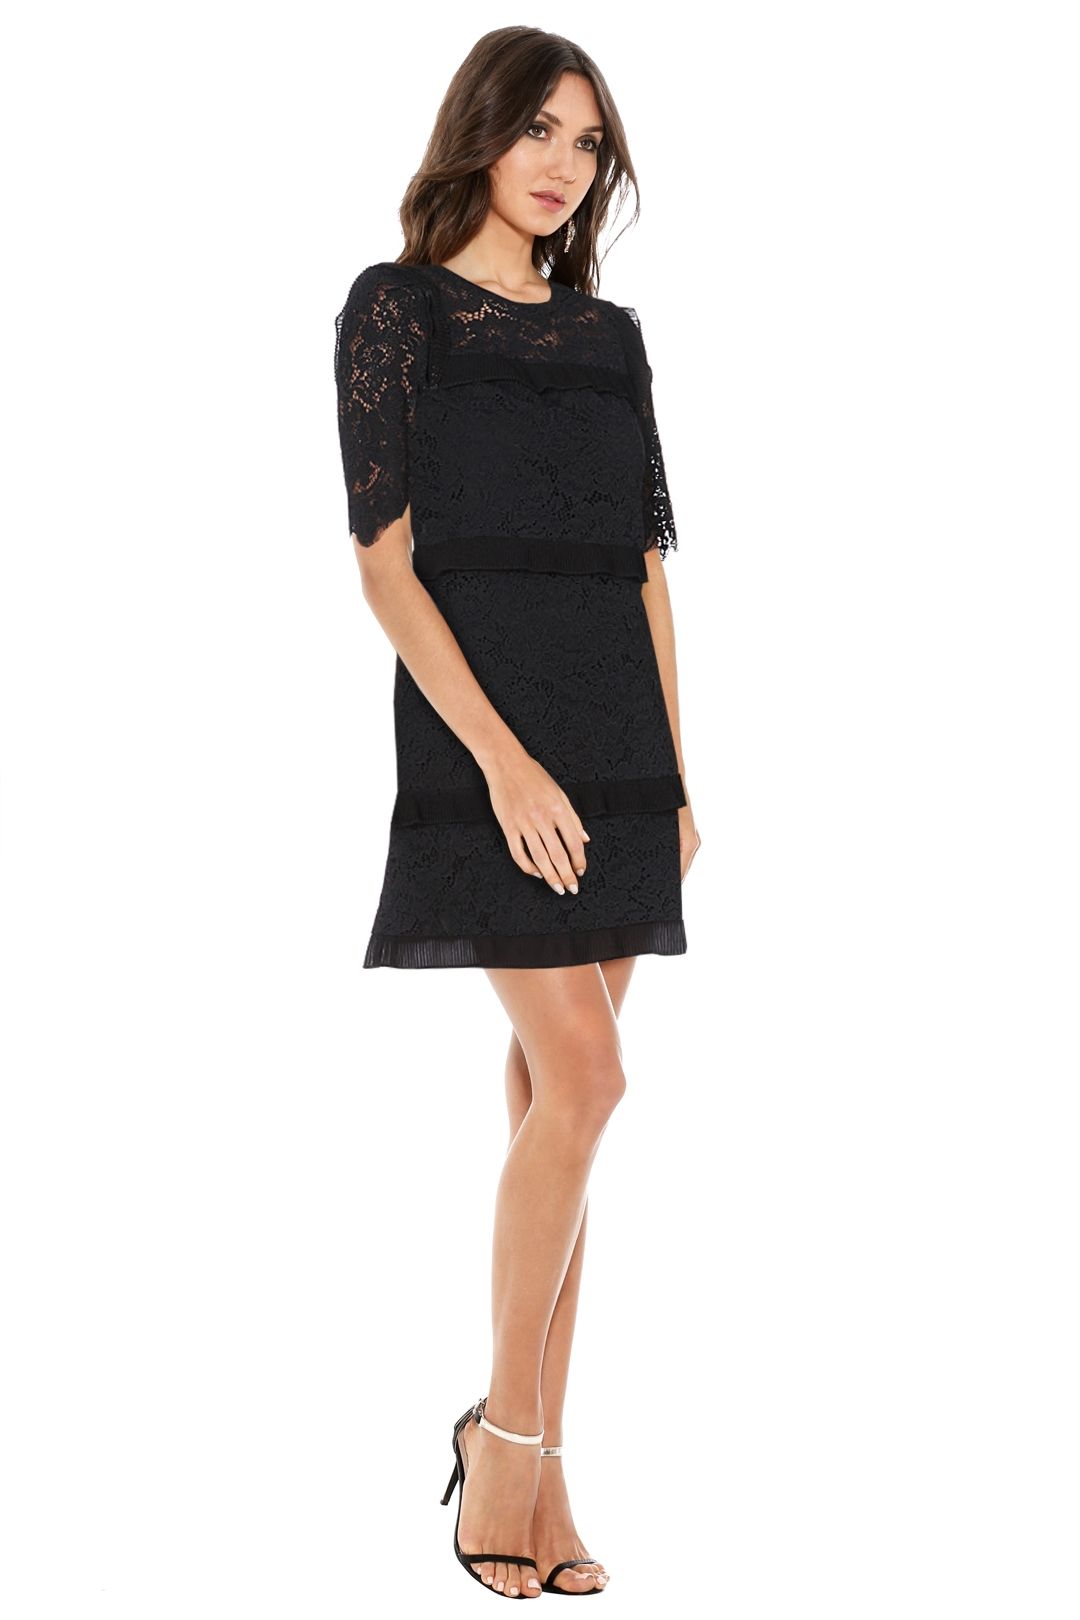 Claudie Peirlot - The Rivale Tiered Lace Dress - Black - Side